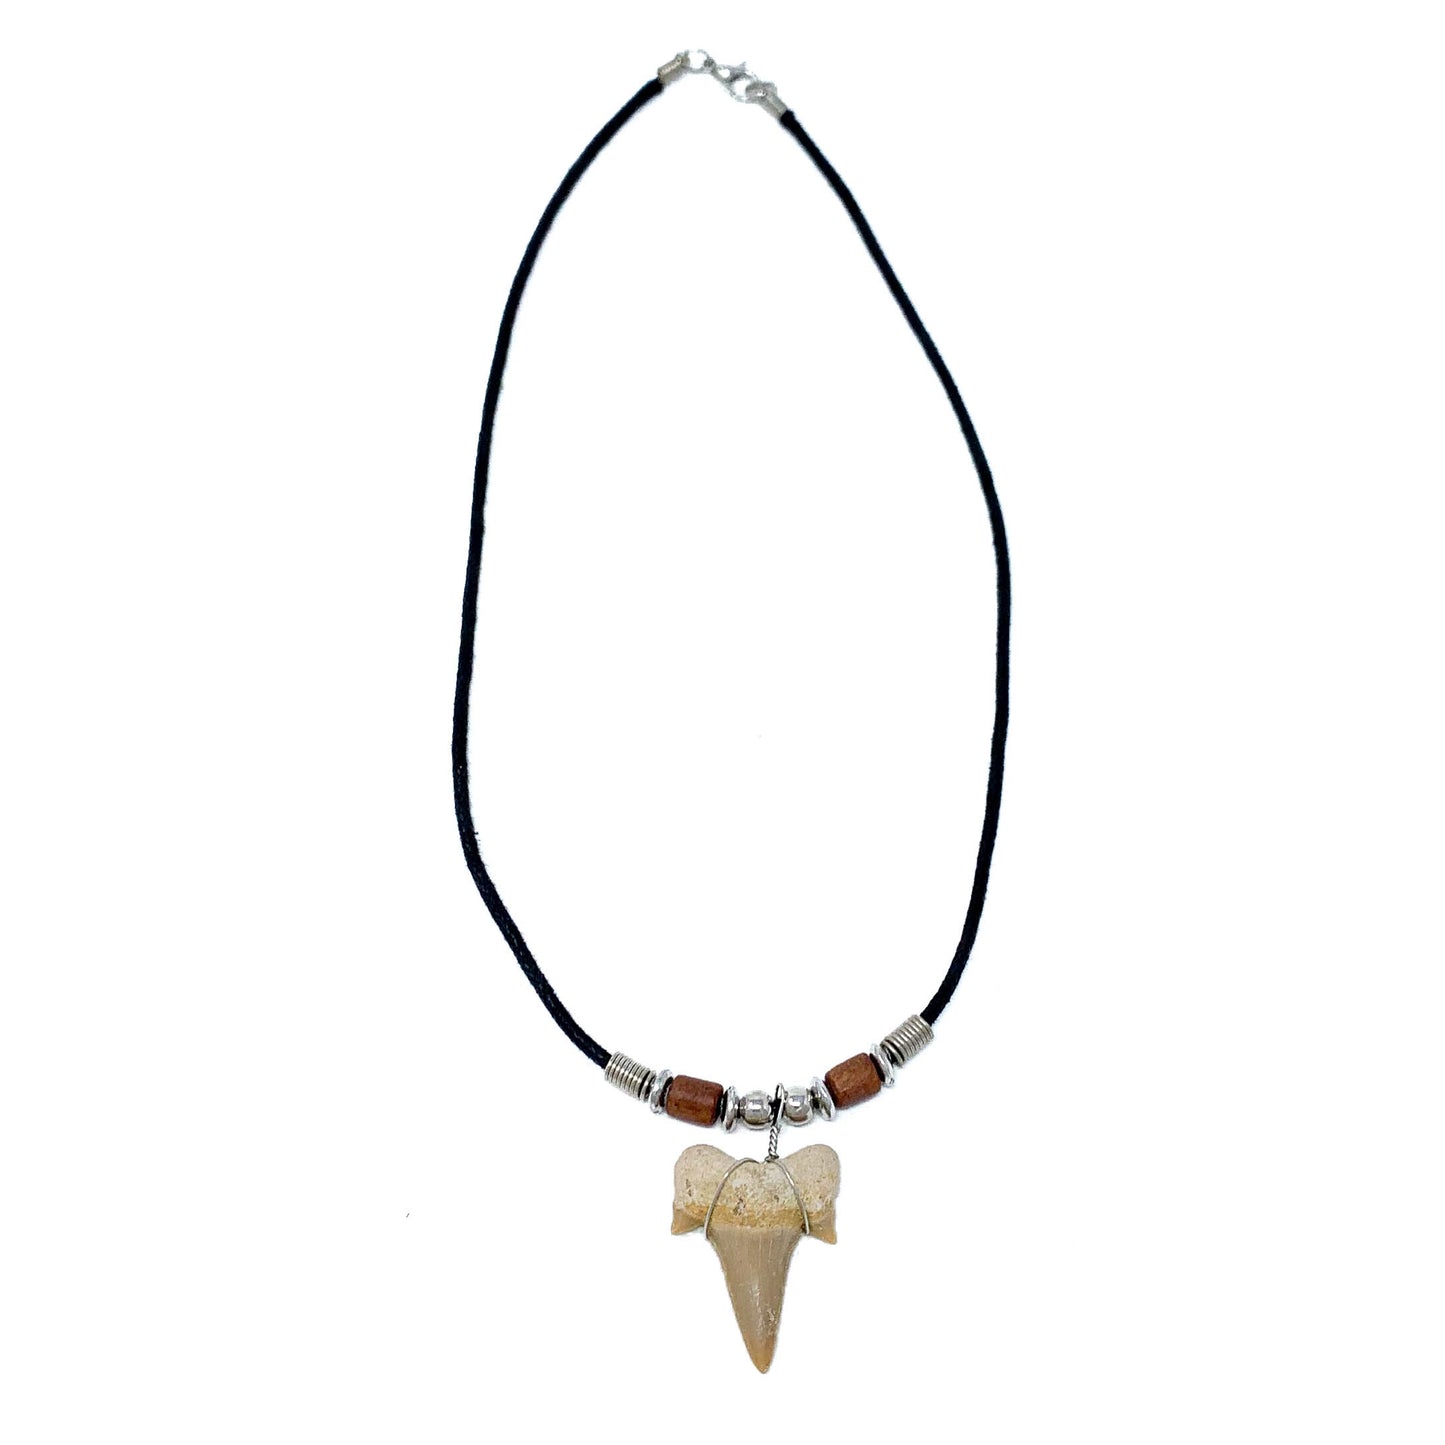 real sharks tooth necklace with a fossilized sharks tooth